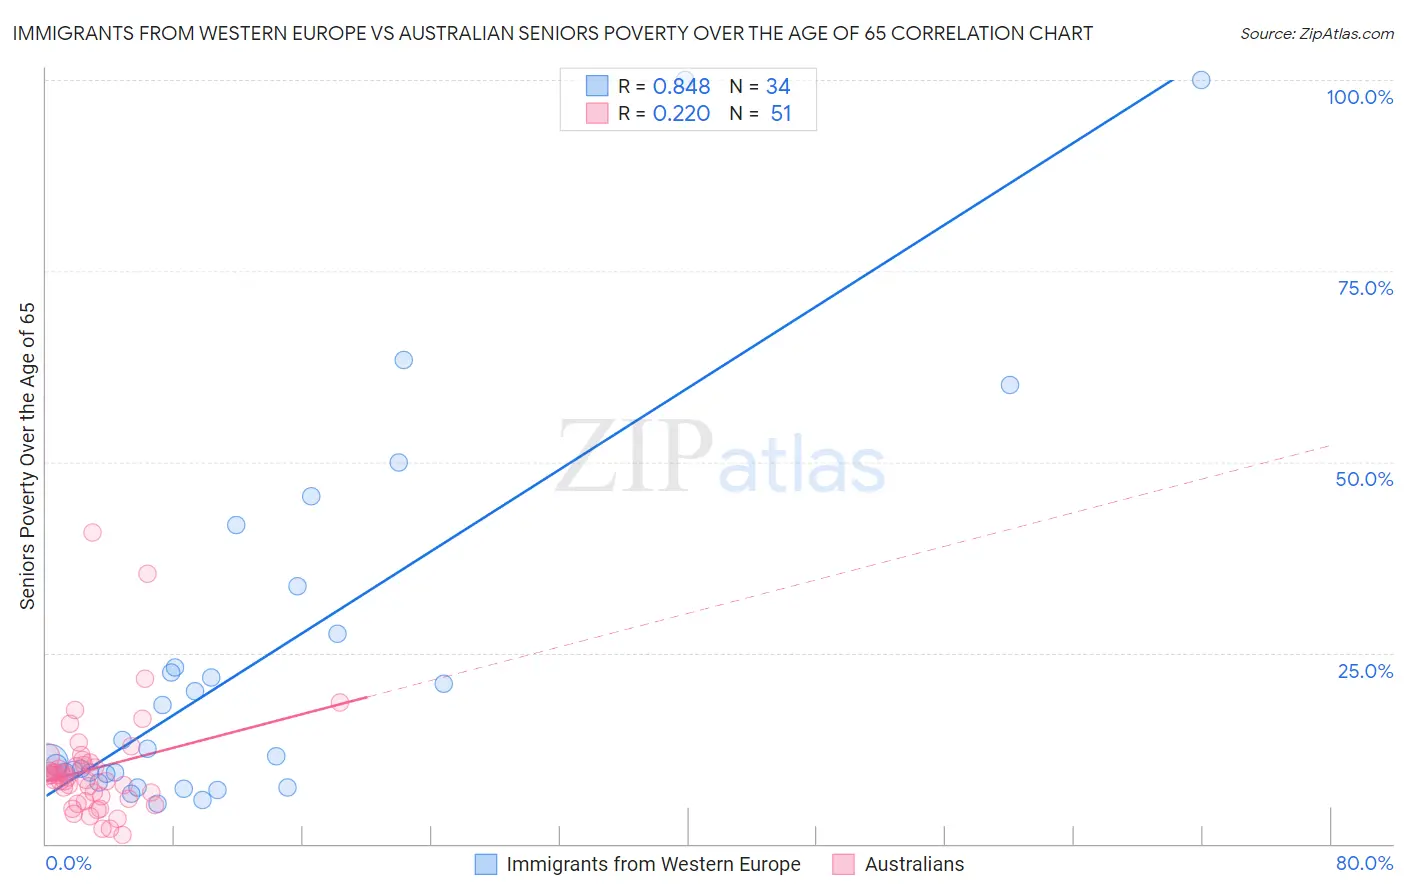 Immigrants from Western Europe vs Australian Seniors Poverty Over the Age of 65